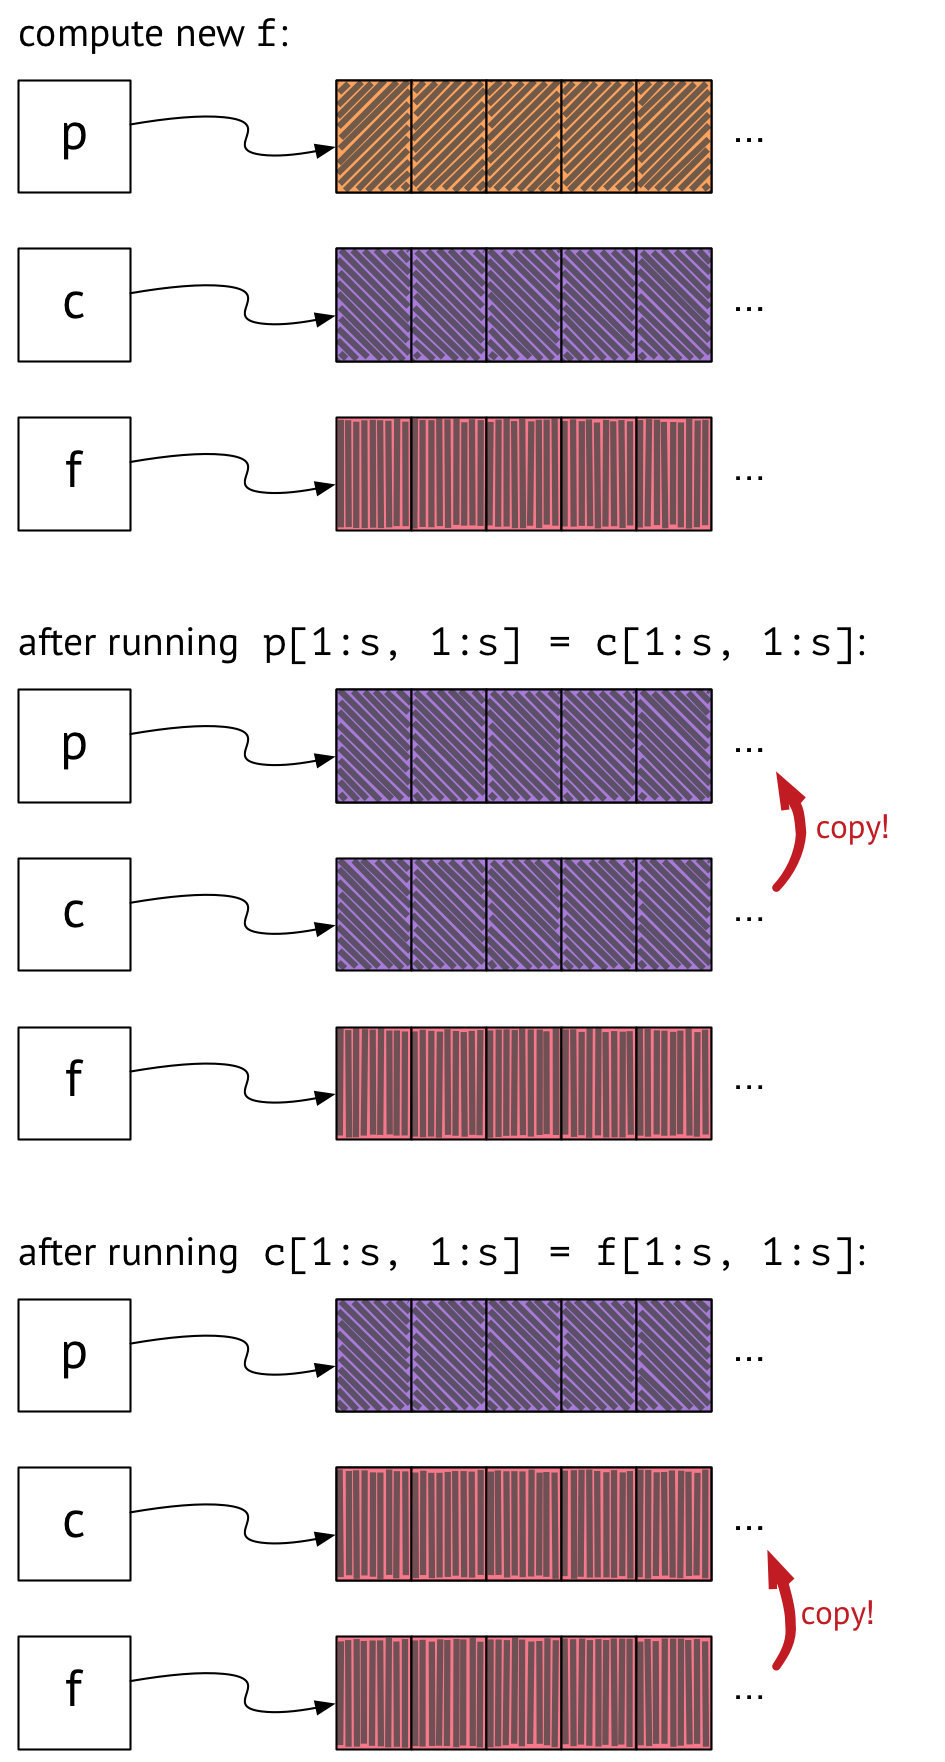 Three box-and-pointer diagrams, showing what happens on the second trip around the main loop of the simulation.  In the first diagram, p points to an orange array, c points to a purple array, and f now points to a pink array.  The next two diagrams show what happens when p and c are updated: first, the contents of the array pointed to by c are copied over into the array pointed to by p; next, the contents of the array pointed to by f are copied over into the array pointed to by c.  The arrays pointed to by p, c, and f are now purple, pink, and pink, respectively.